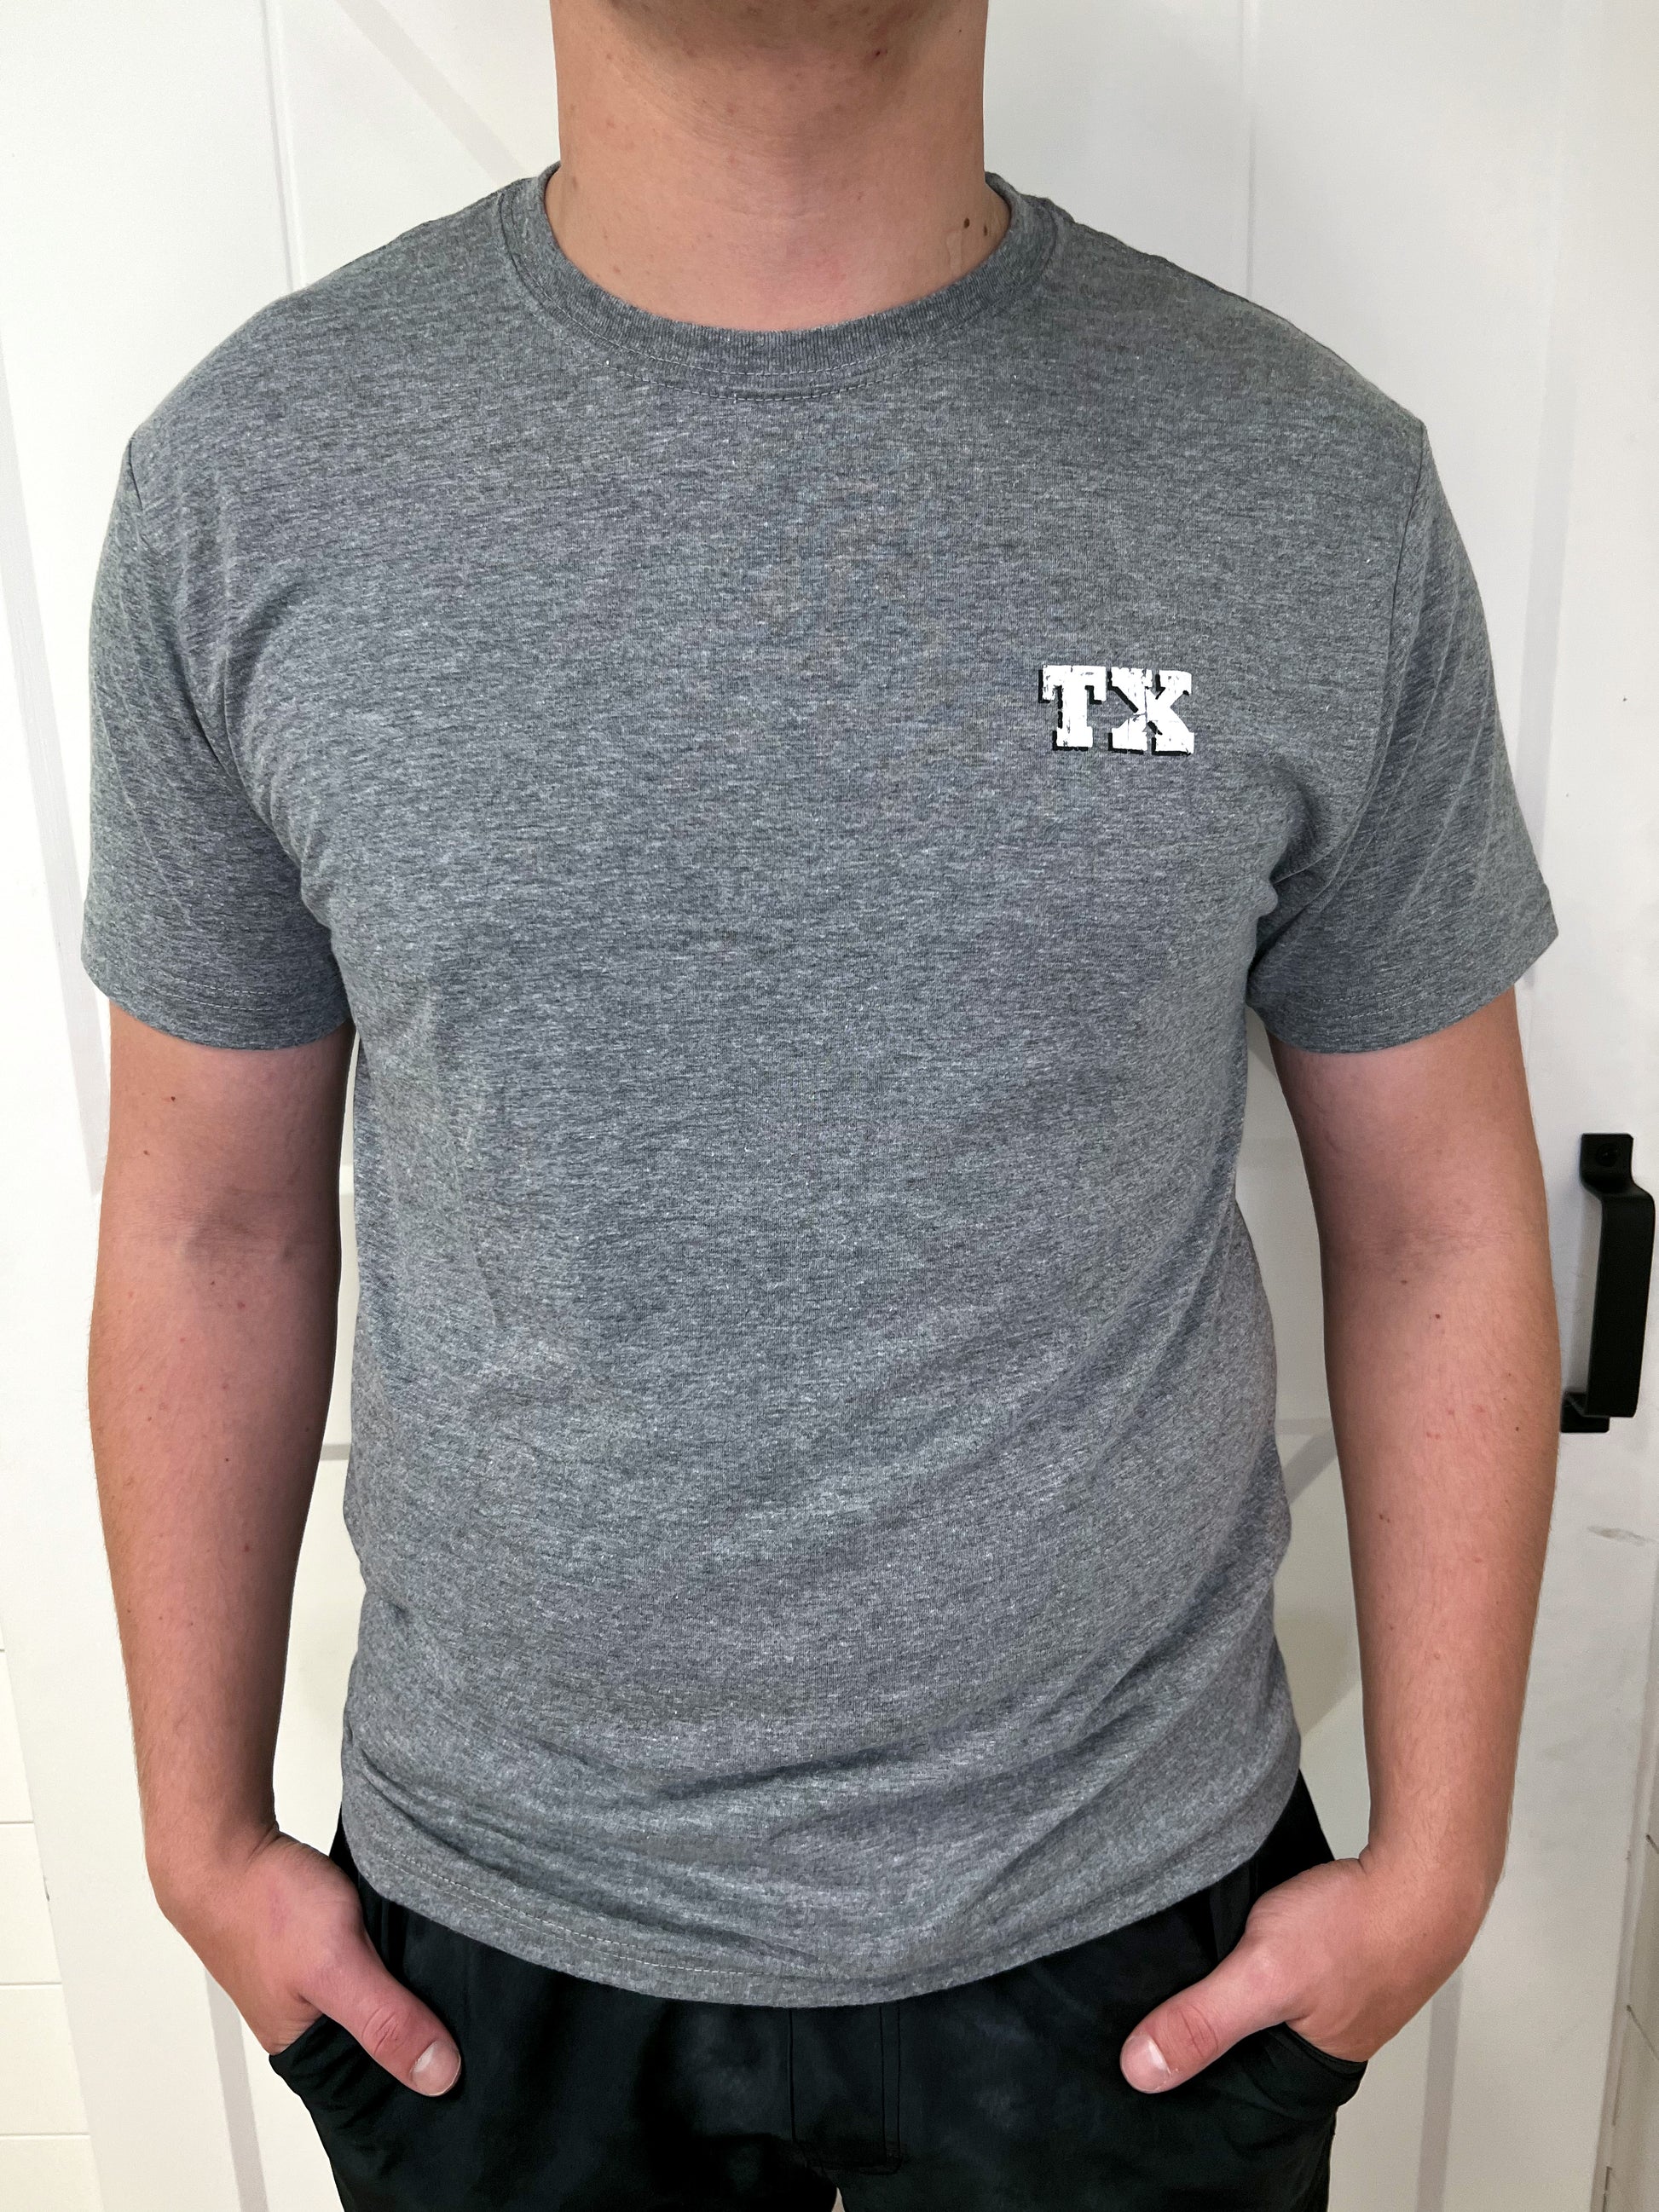 Tx Unisex Waterways Crew Neck T-Shirt-T-Shirt-The Royal Standard--The Twisted Chandelier